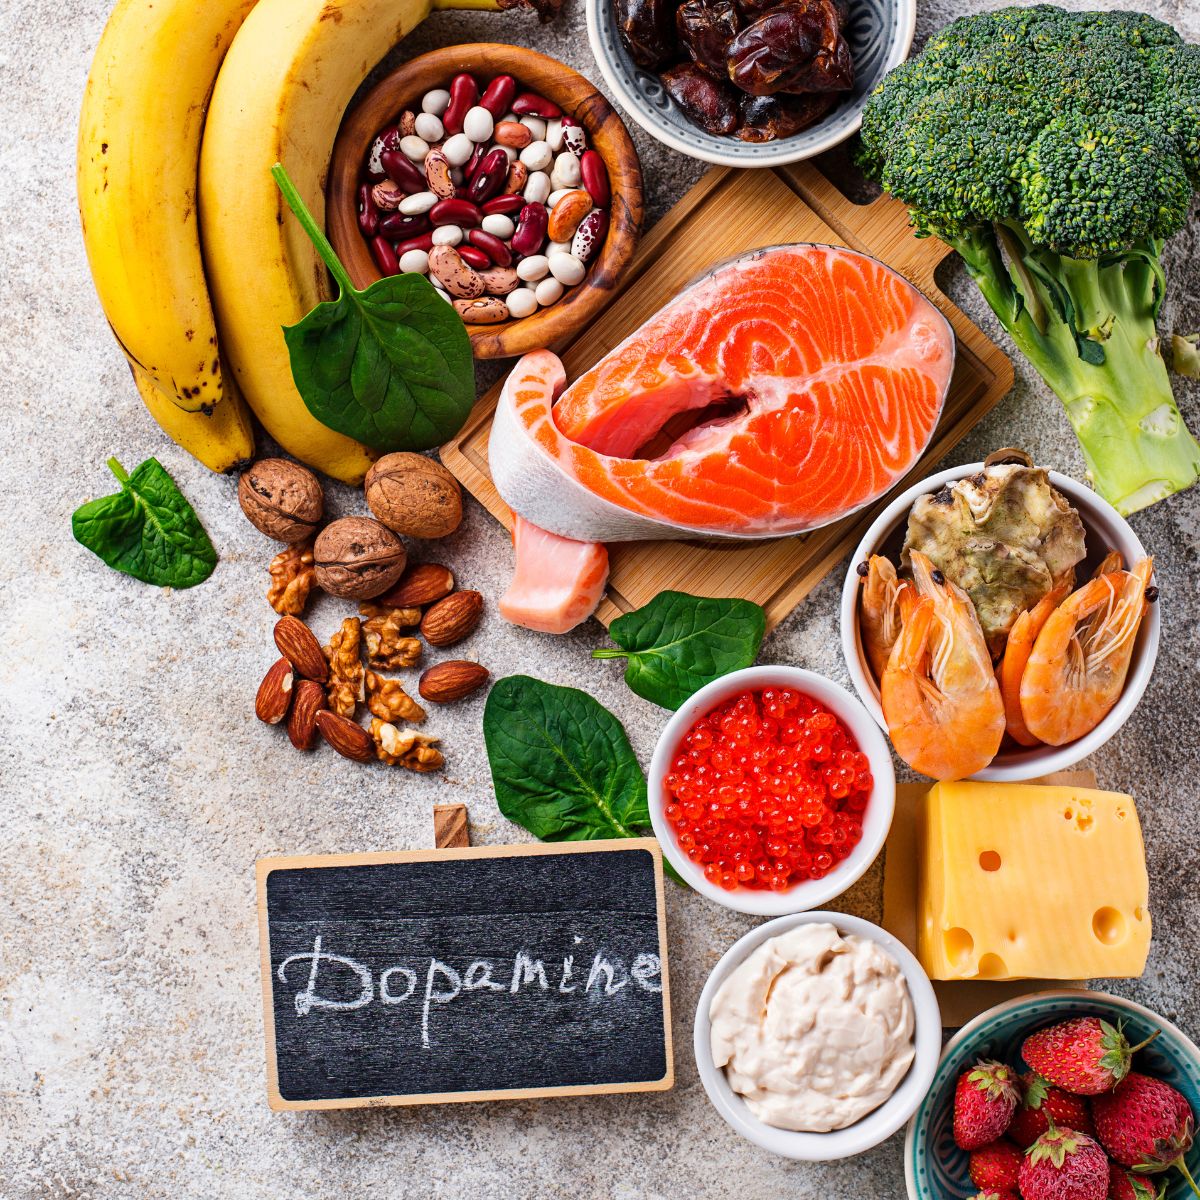 An overhead shot of fish, bananas, nuts, and other healthy foods that increase dopamine naturally with the text "dopamine."